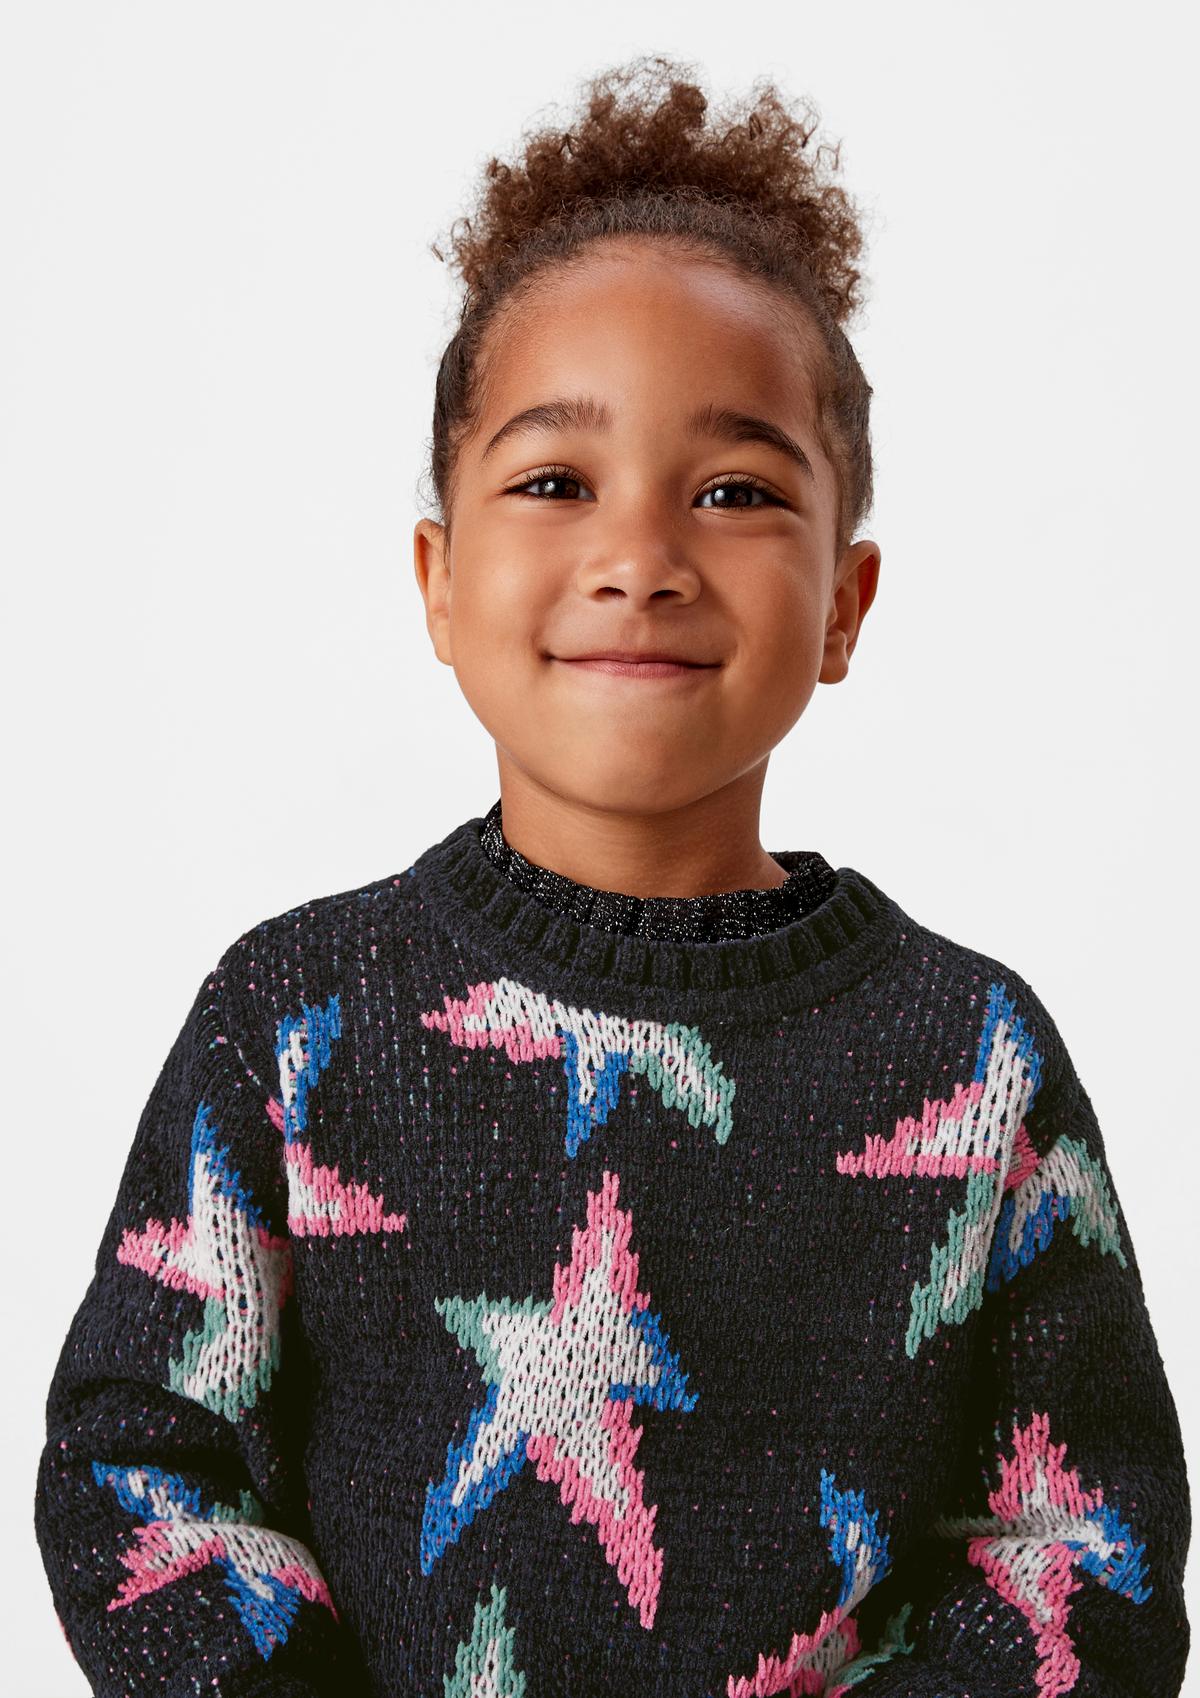 s.Oliver Chenille jumper with an all-over pattern